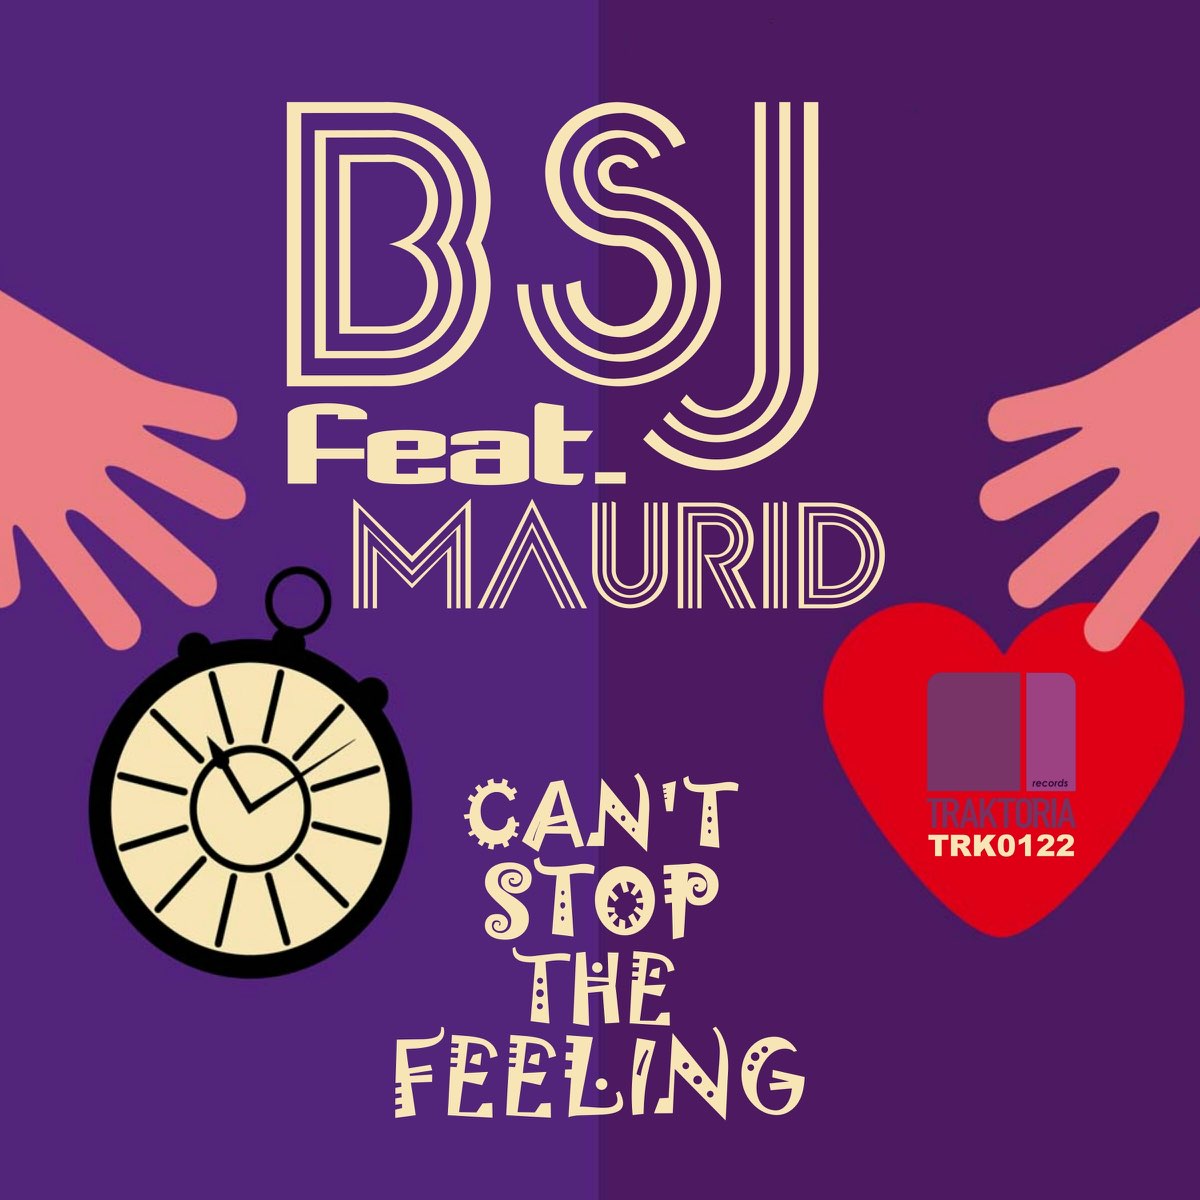 Feel ft. Can't stop the feeling. Feeling песня. Can't stop the feeling! (Mixed). The feeling (Original Mix).